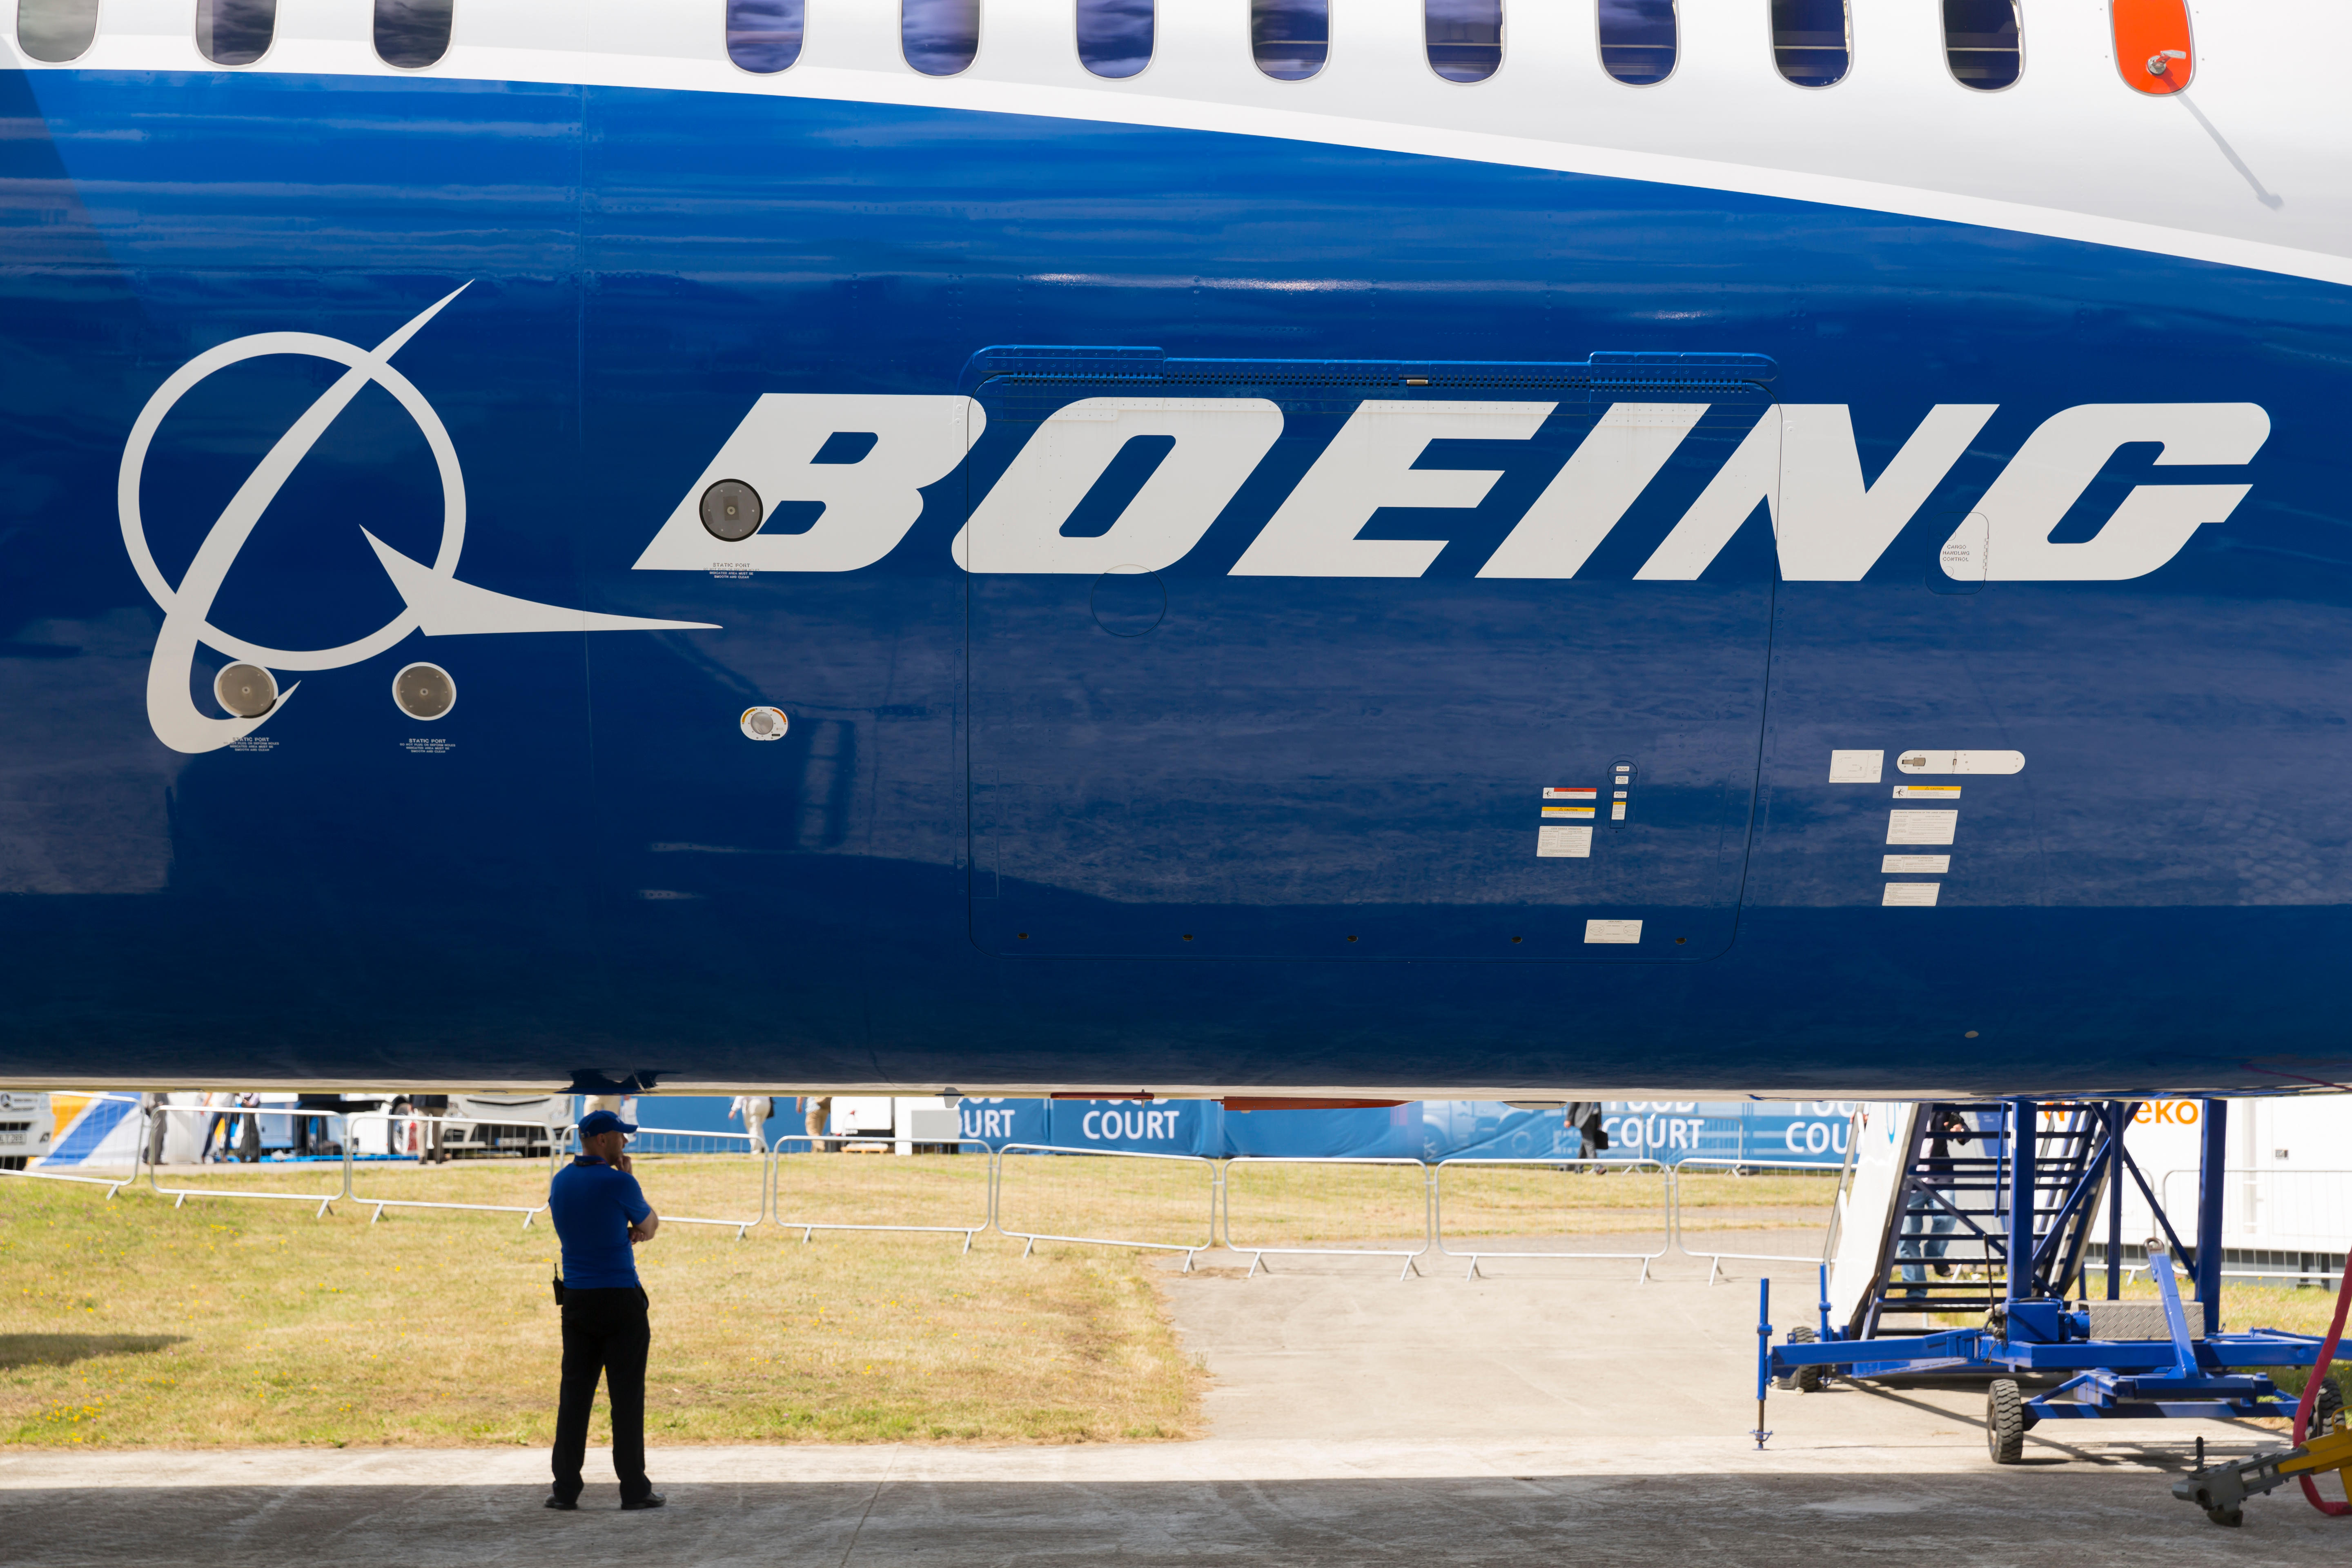 From Dark Reading – Boeing Confirms Cyberattack, System Compromise